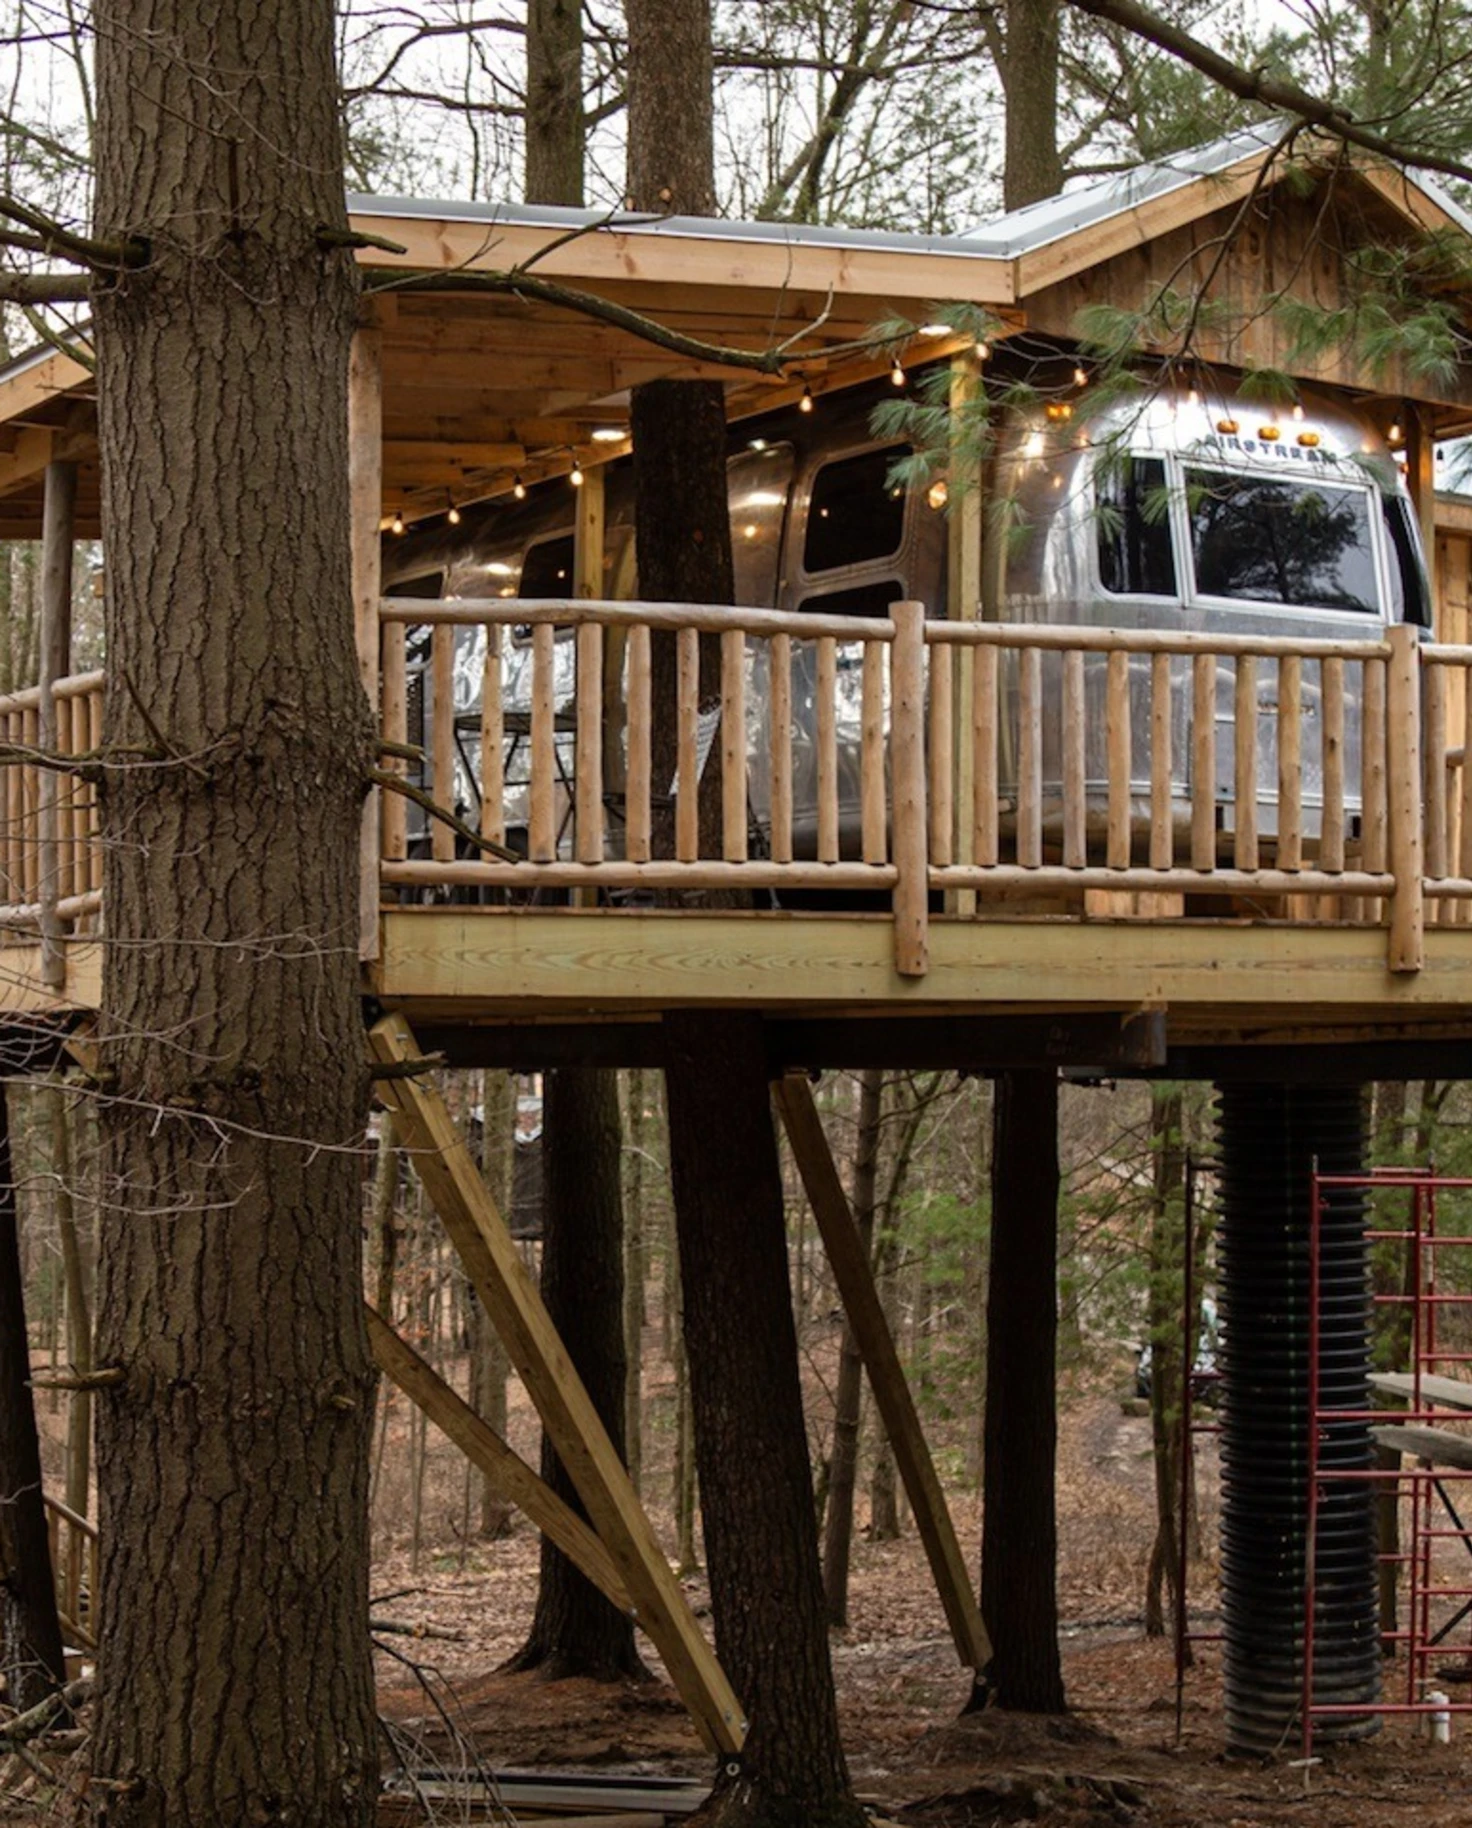 A treehouse in a forest with RV parked in it.